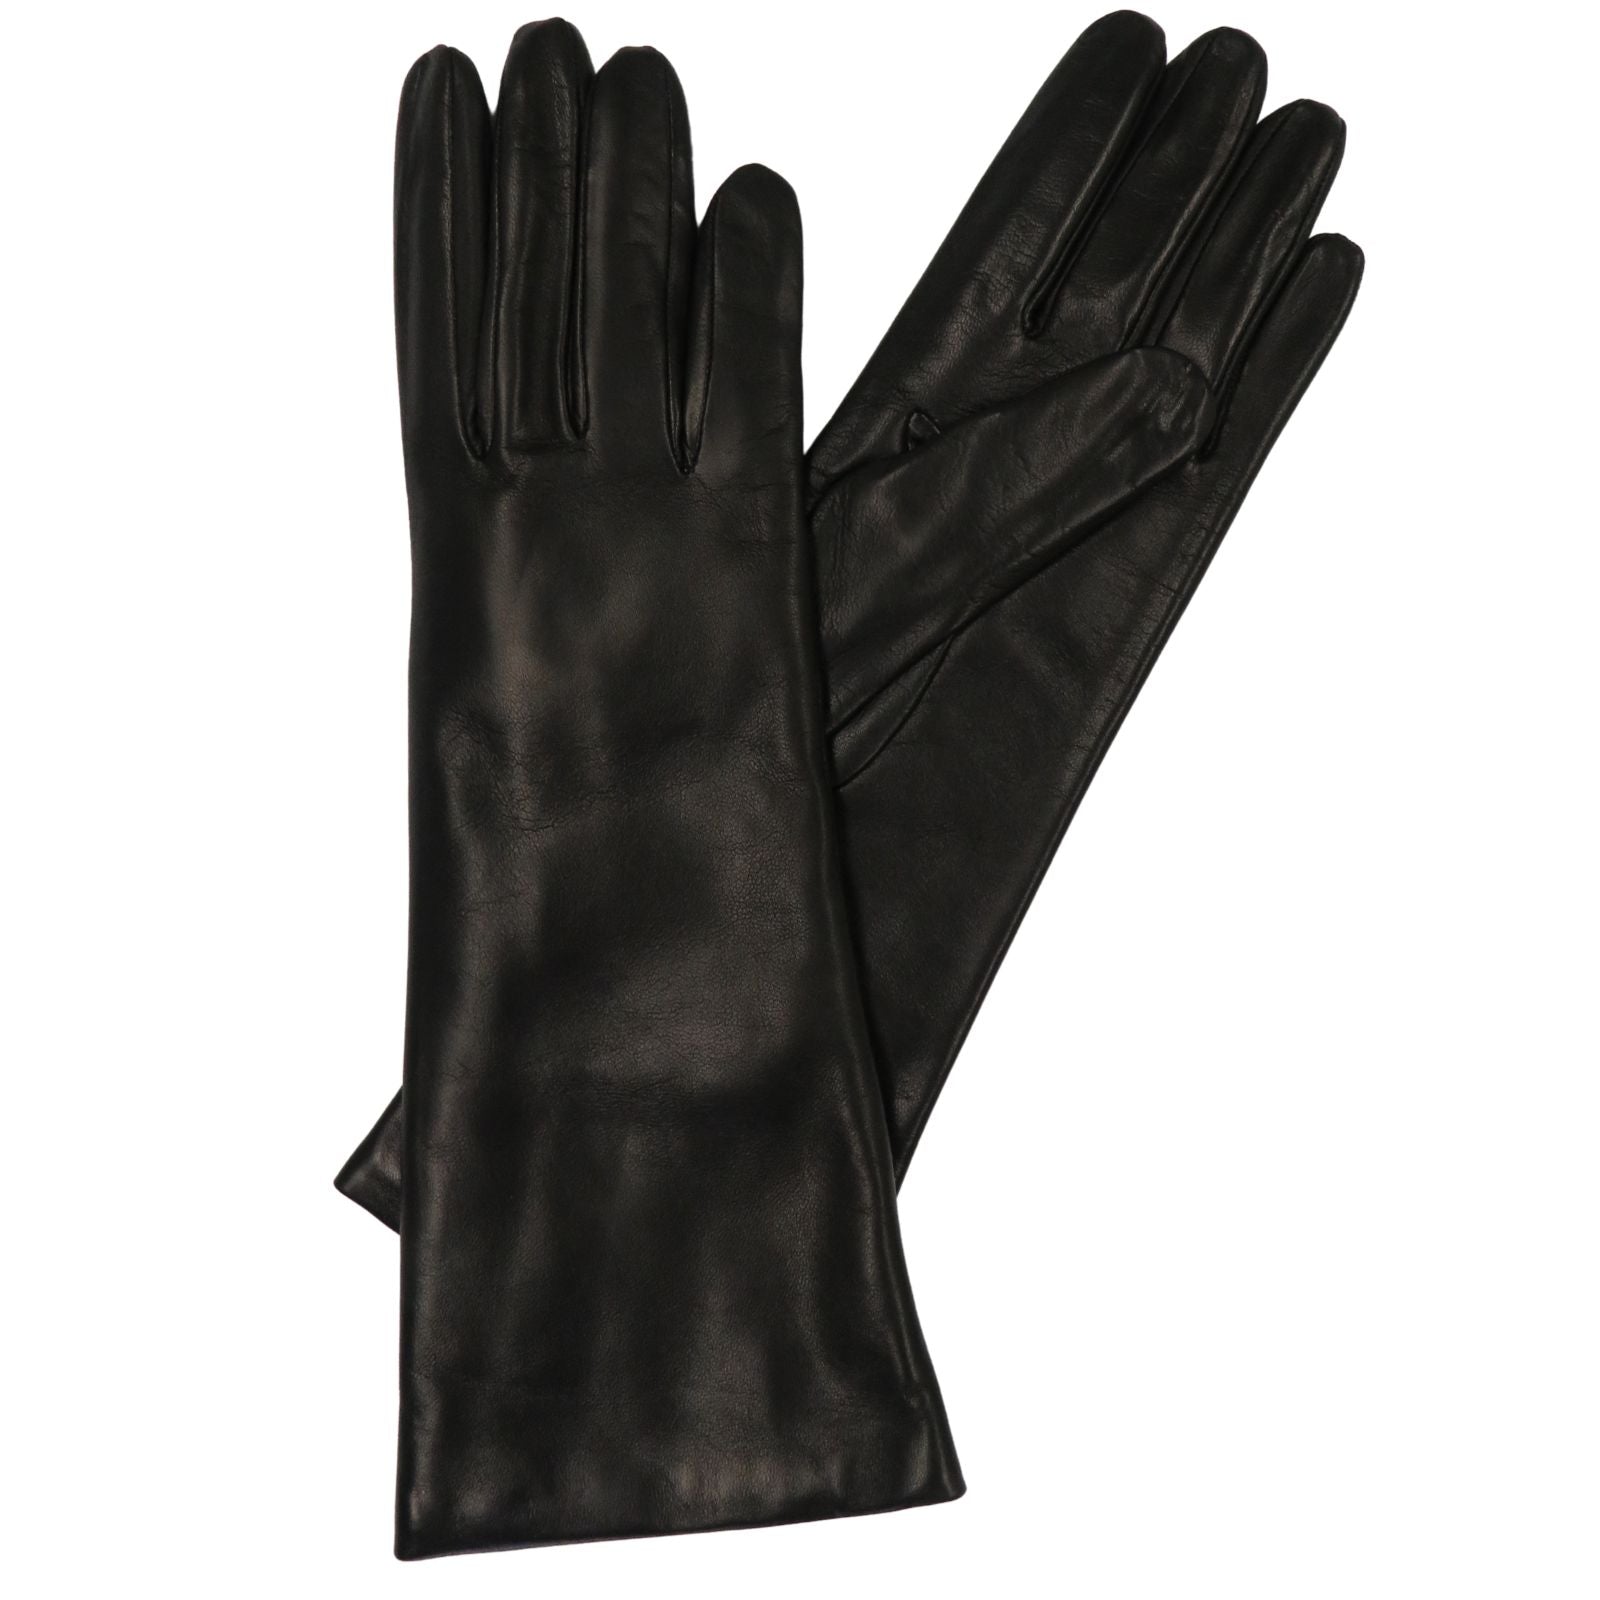 Leather Glove Cashmere Lining BLACK 4 BL LENGTH